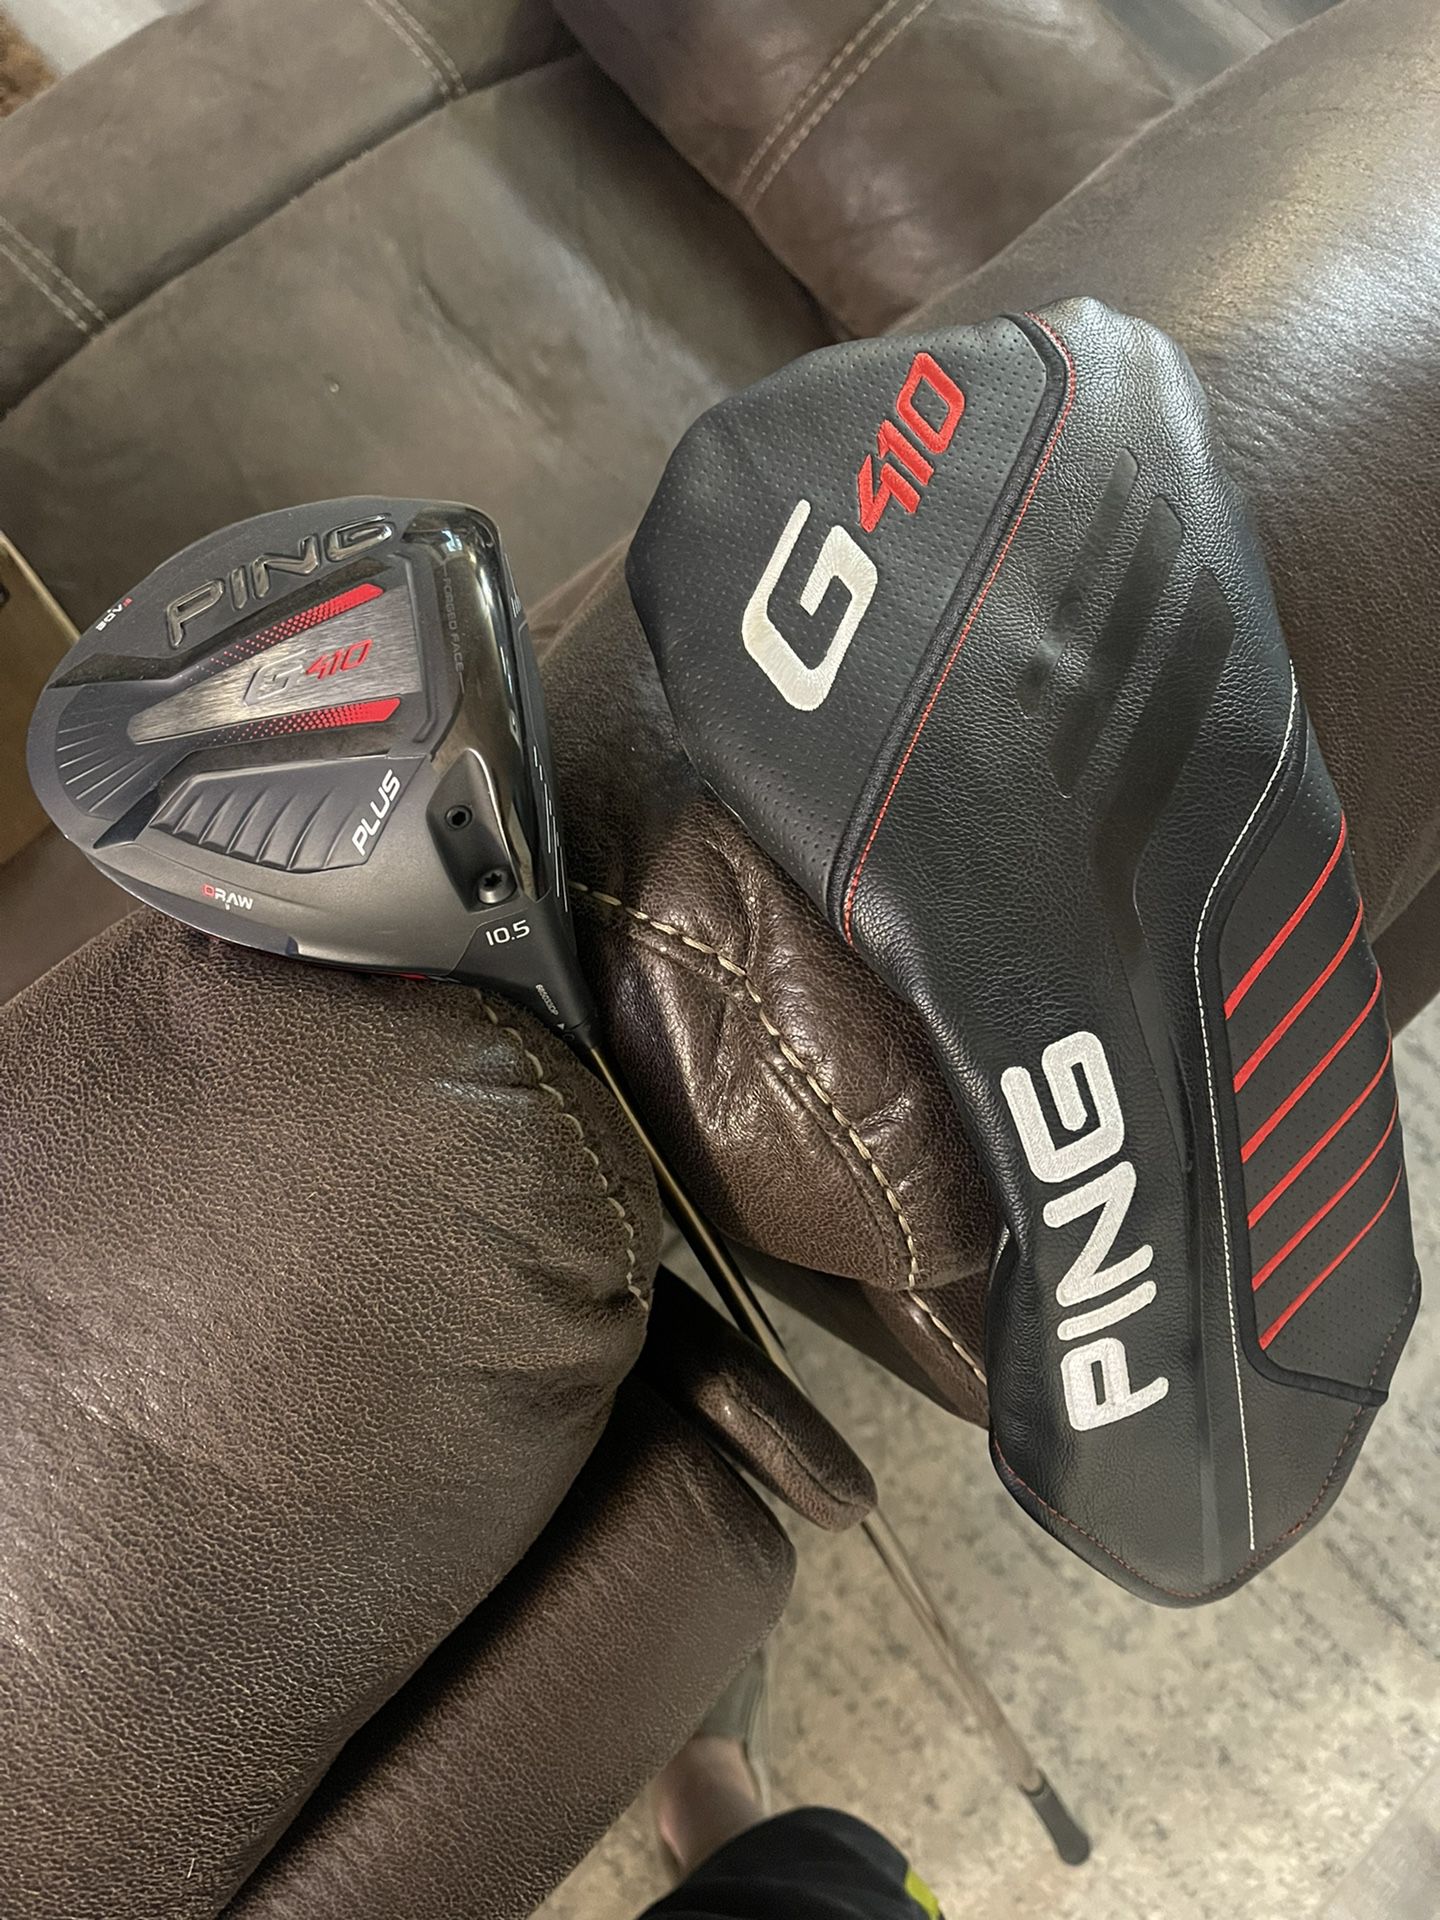 New Ping G410 Plus Golf Driver